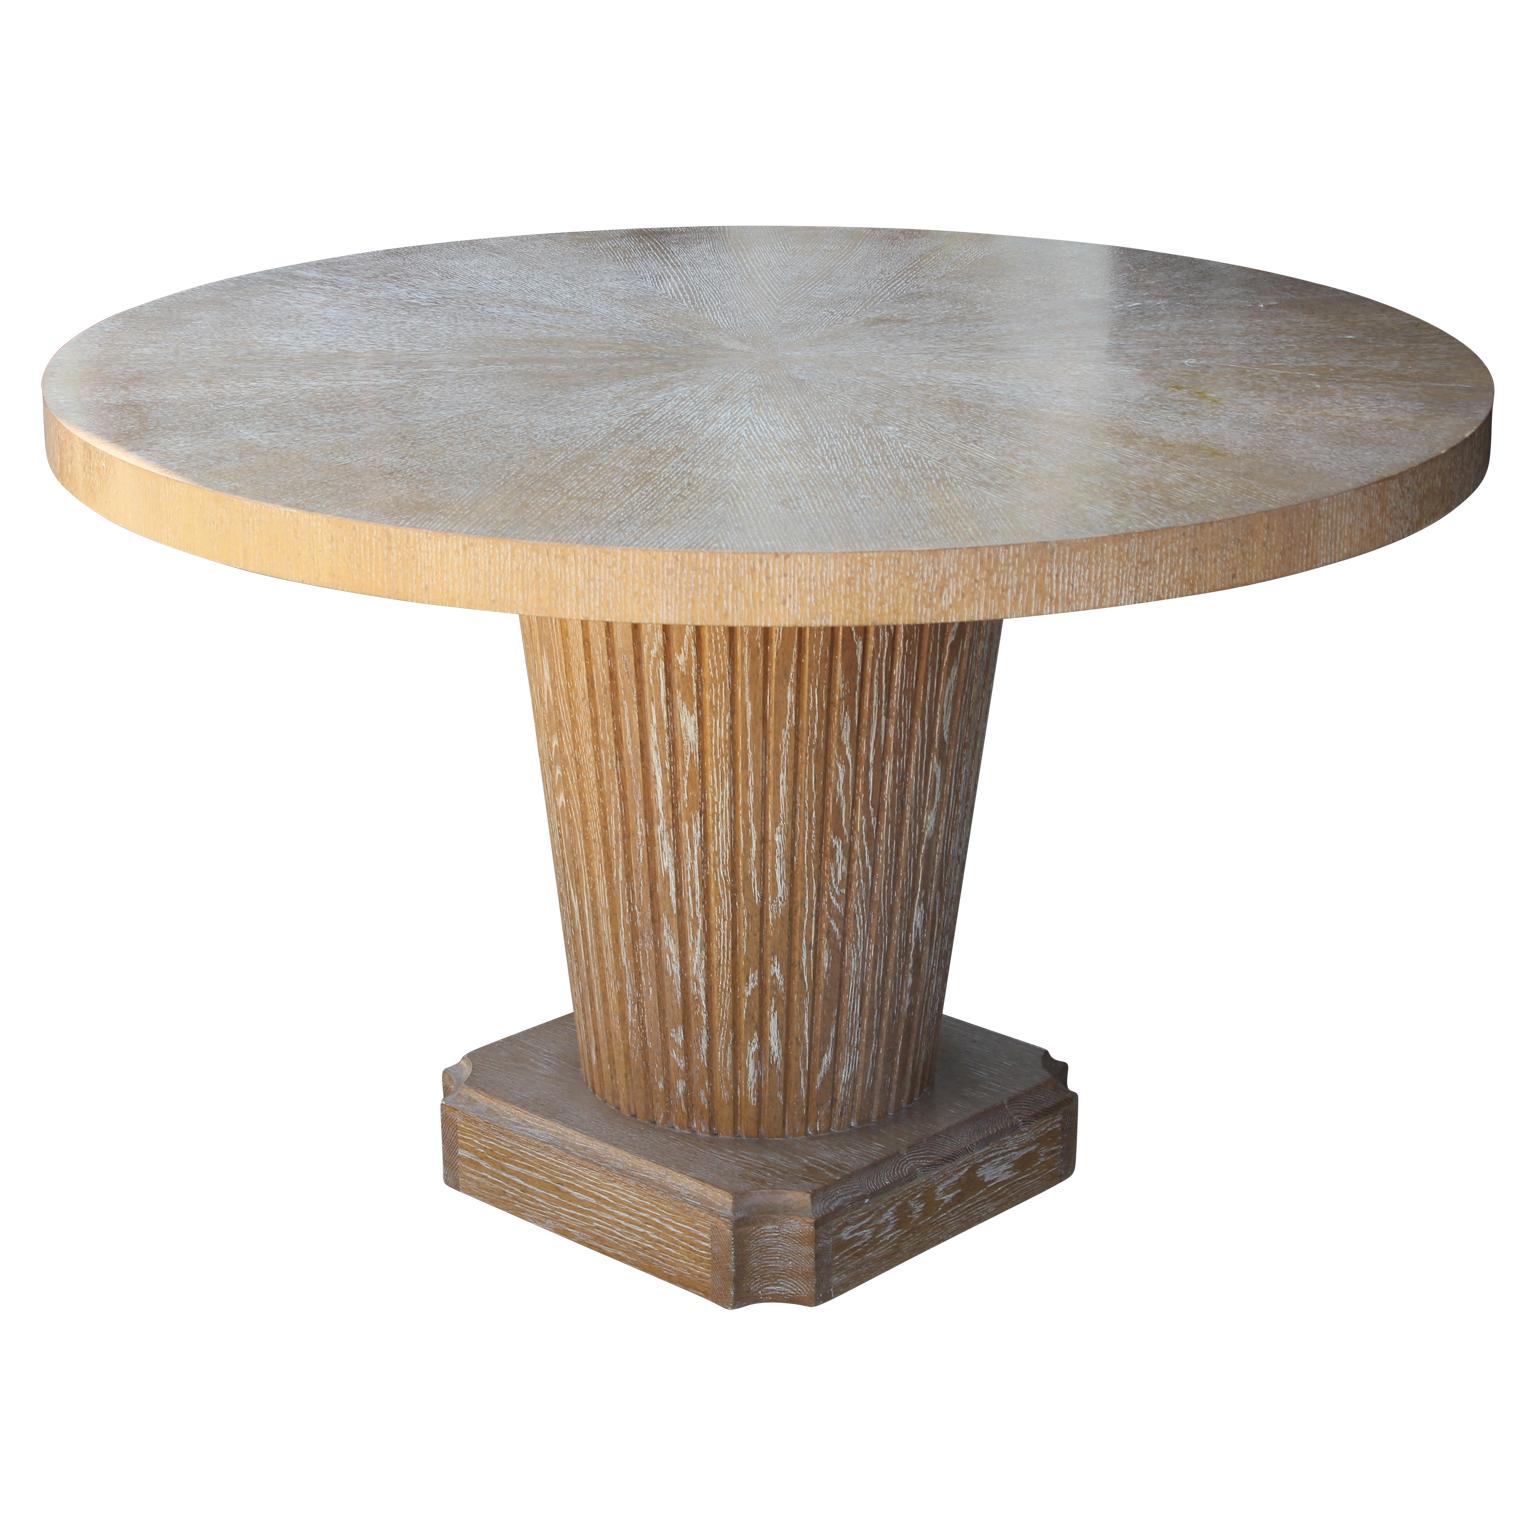 Beautiful 48 inch round dining table. This oak table by Nancy Corzine has a cerused finish and is in the art deco style.